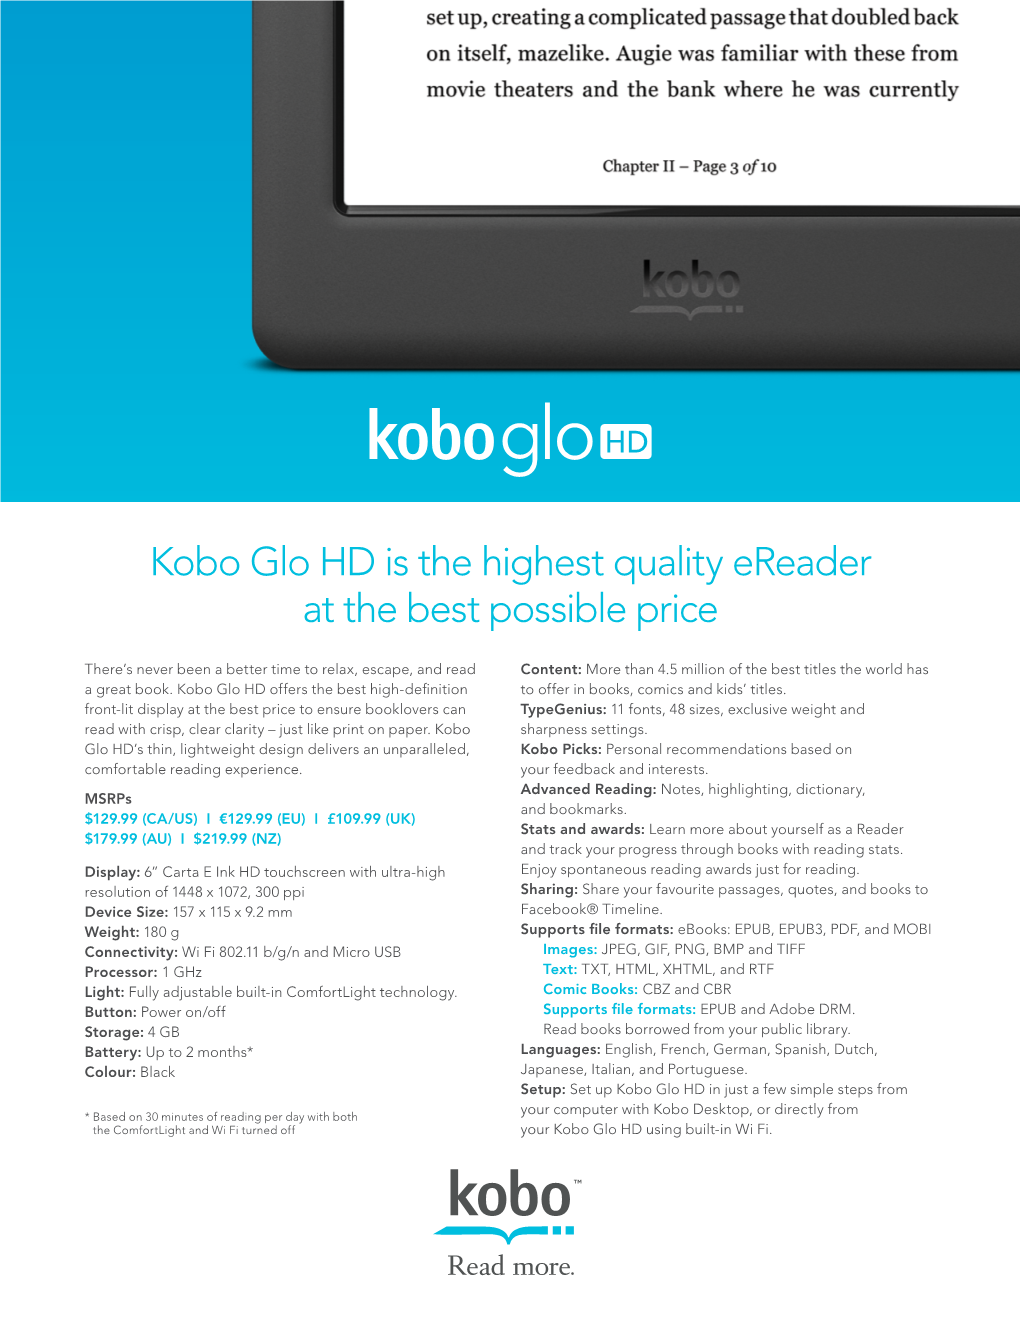 Kobo Glo HD Is the Highest Quality Ereader at the Best Possible Price